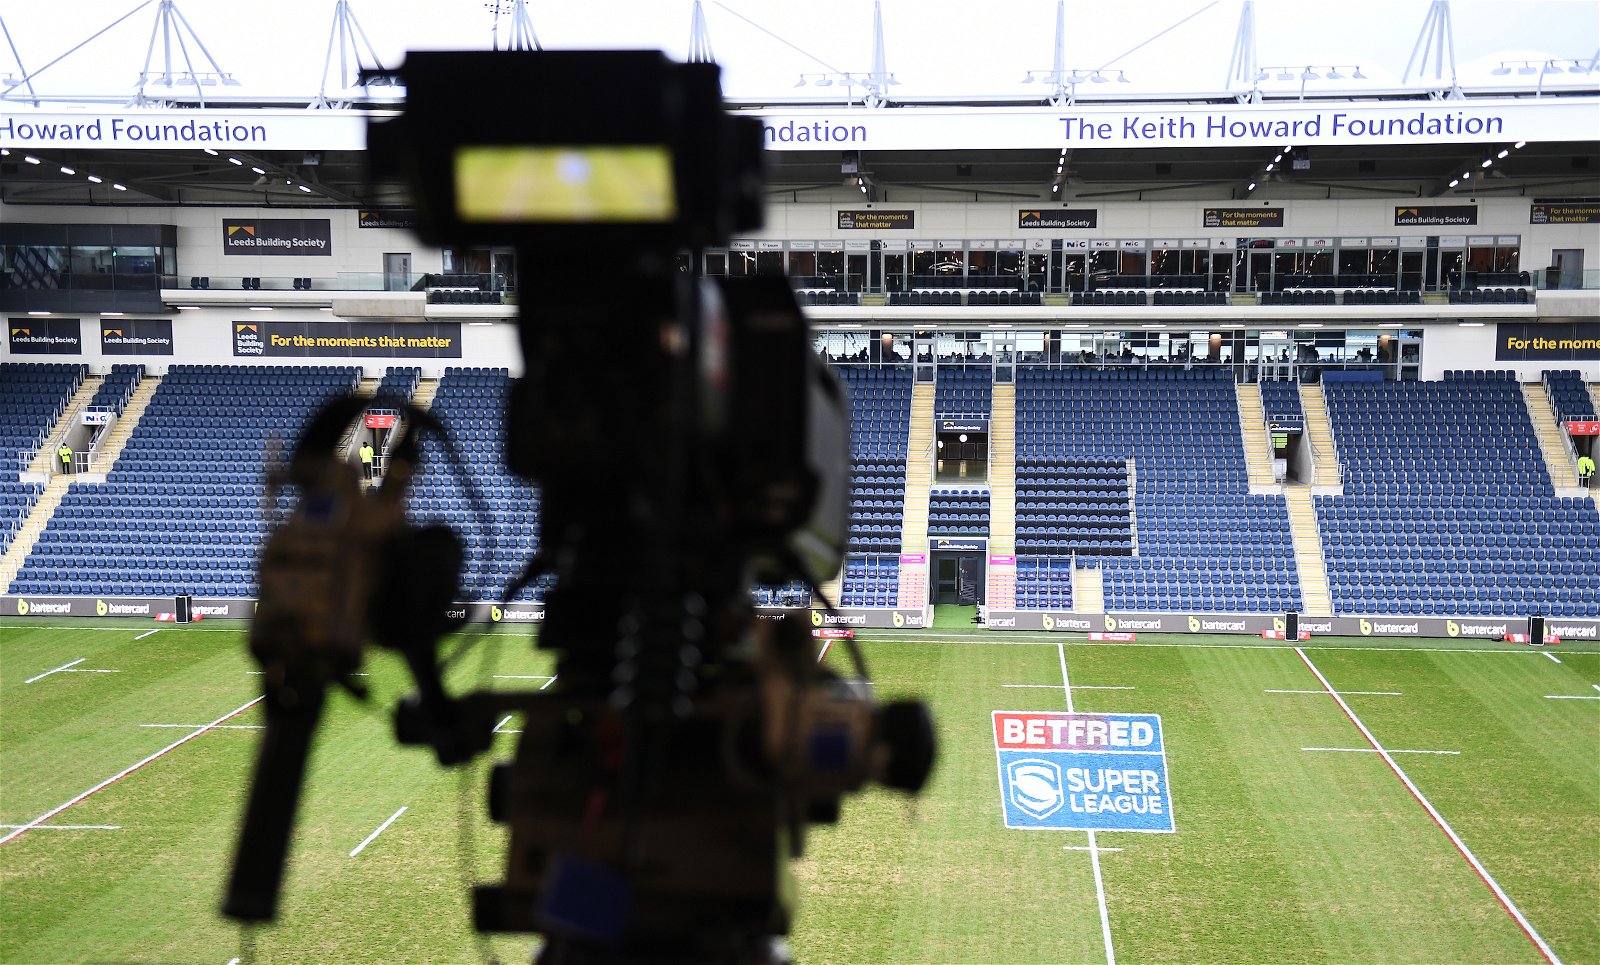 Channel 4 TV Cameras at an empty Headingley Stadium. Super League on TV